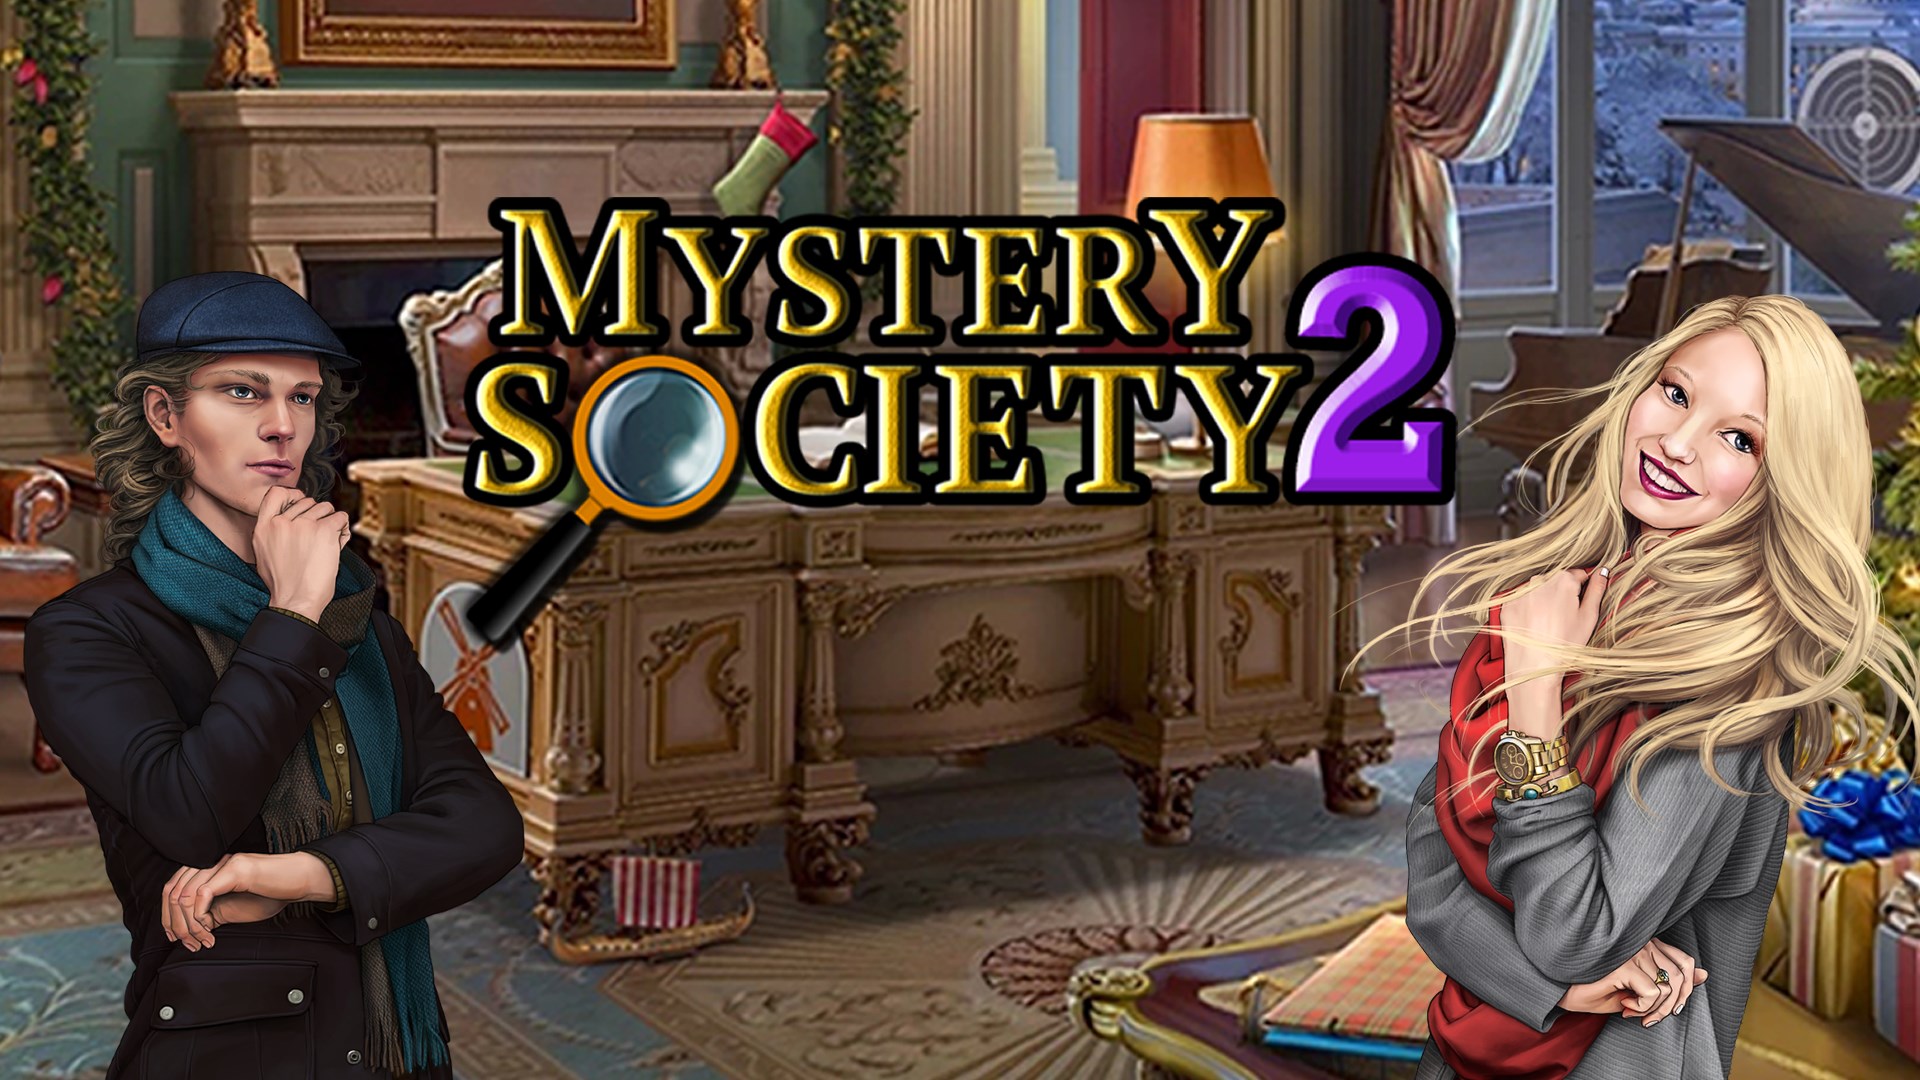 Free Hidden Objects Games: Unlock the Secrets of Puzzling Worlds